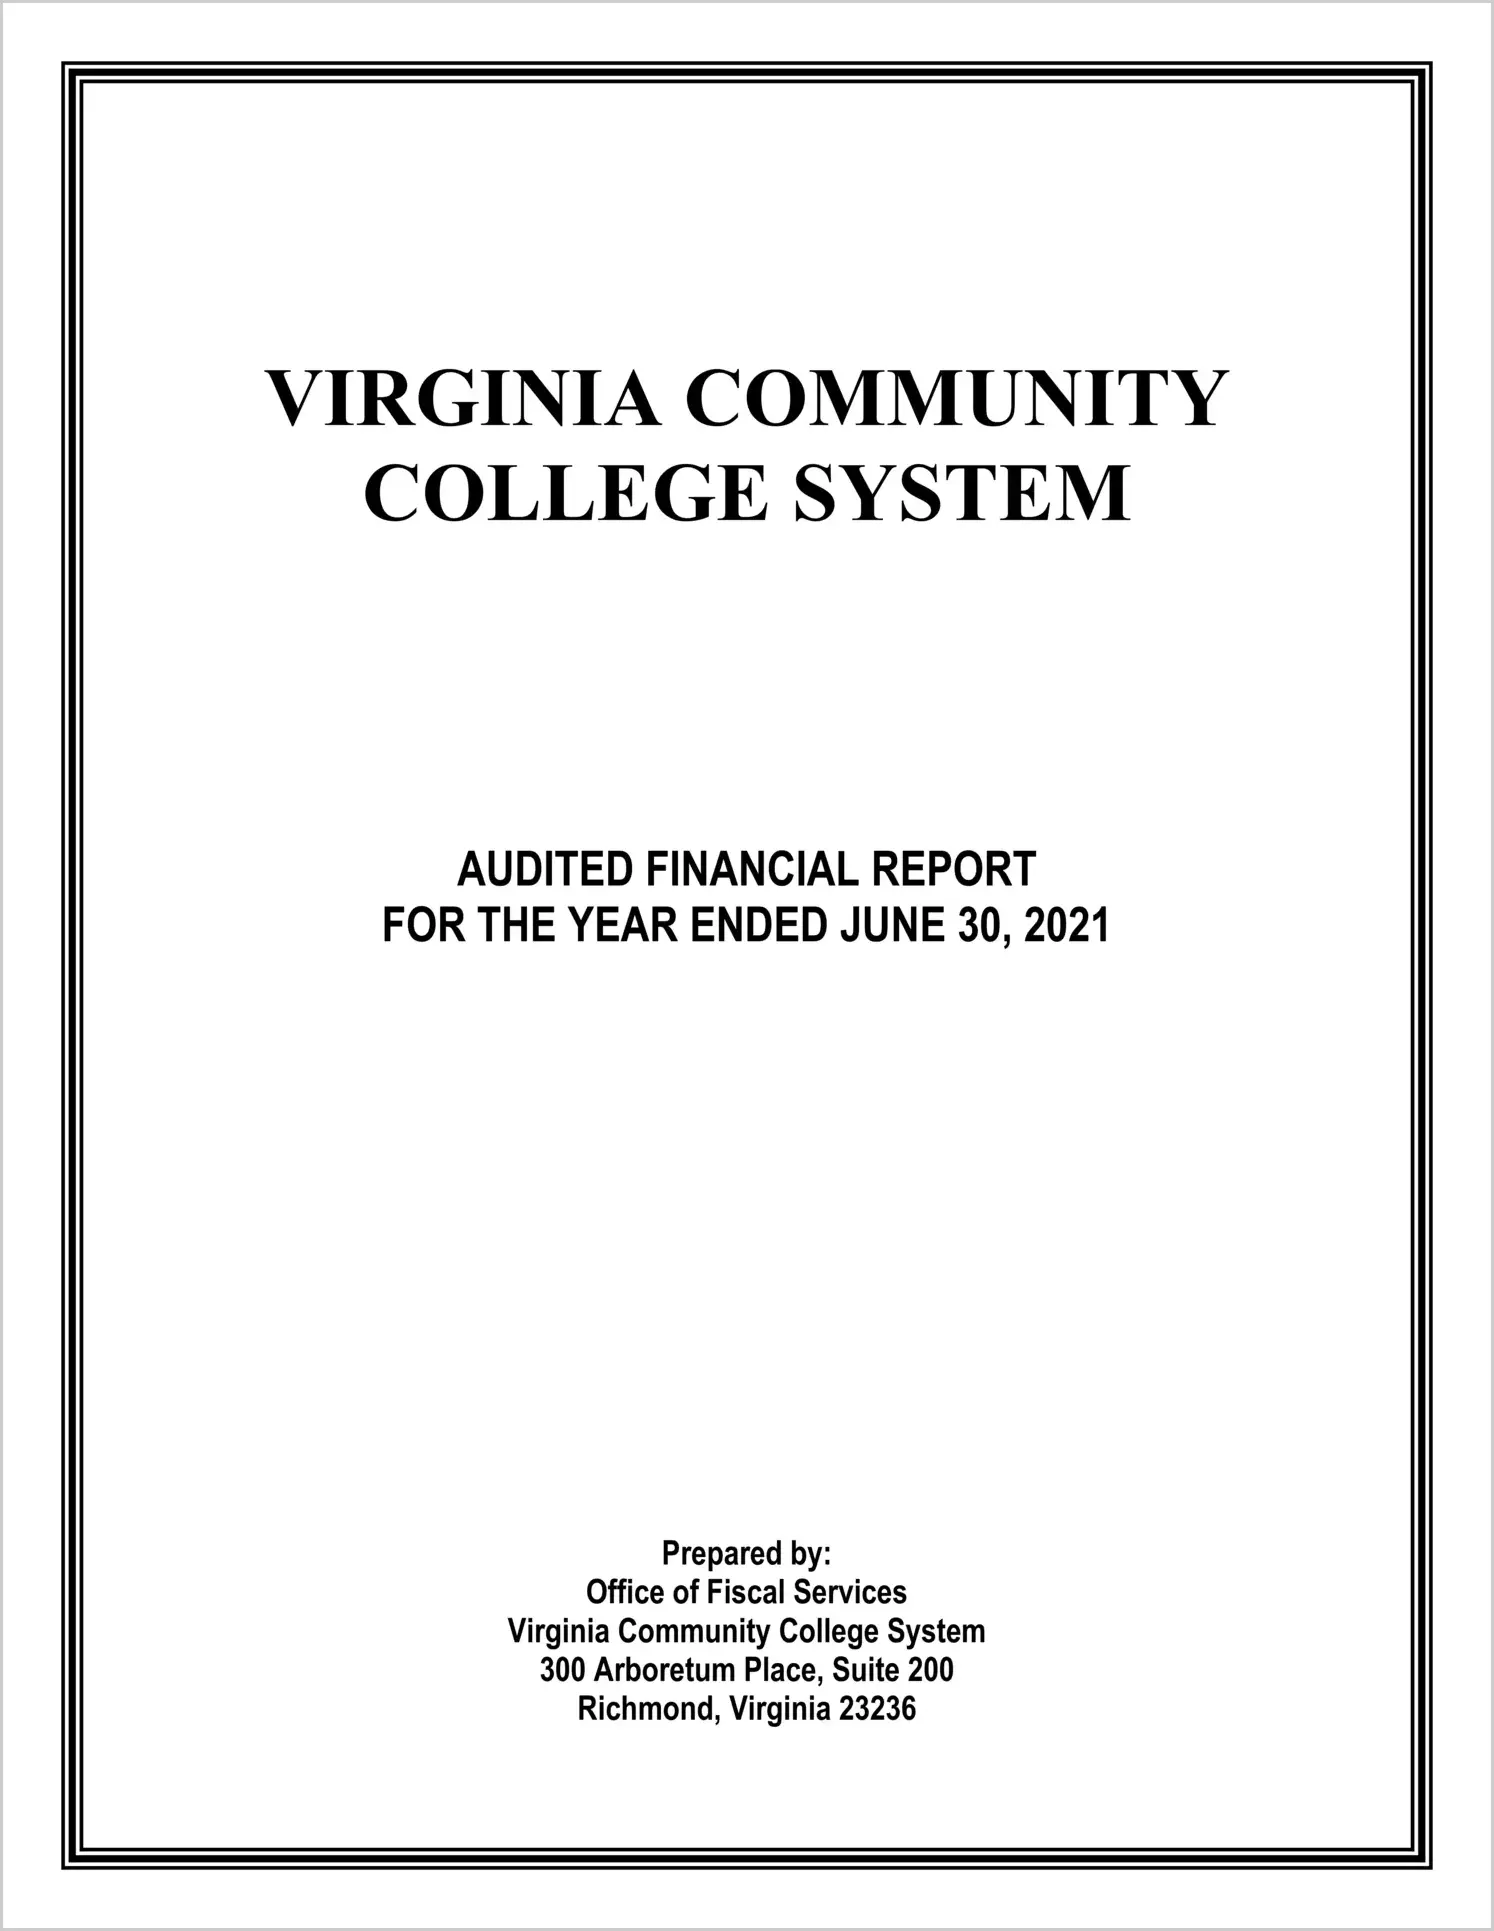 Virginia Community College System Financial Statements for the year ended June 30, 2021